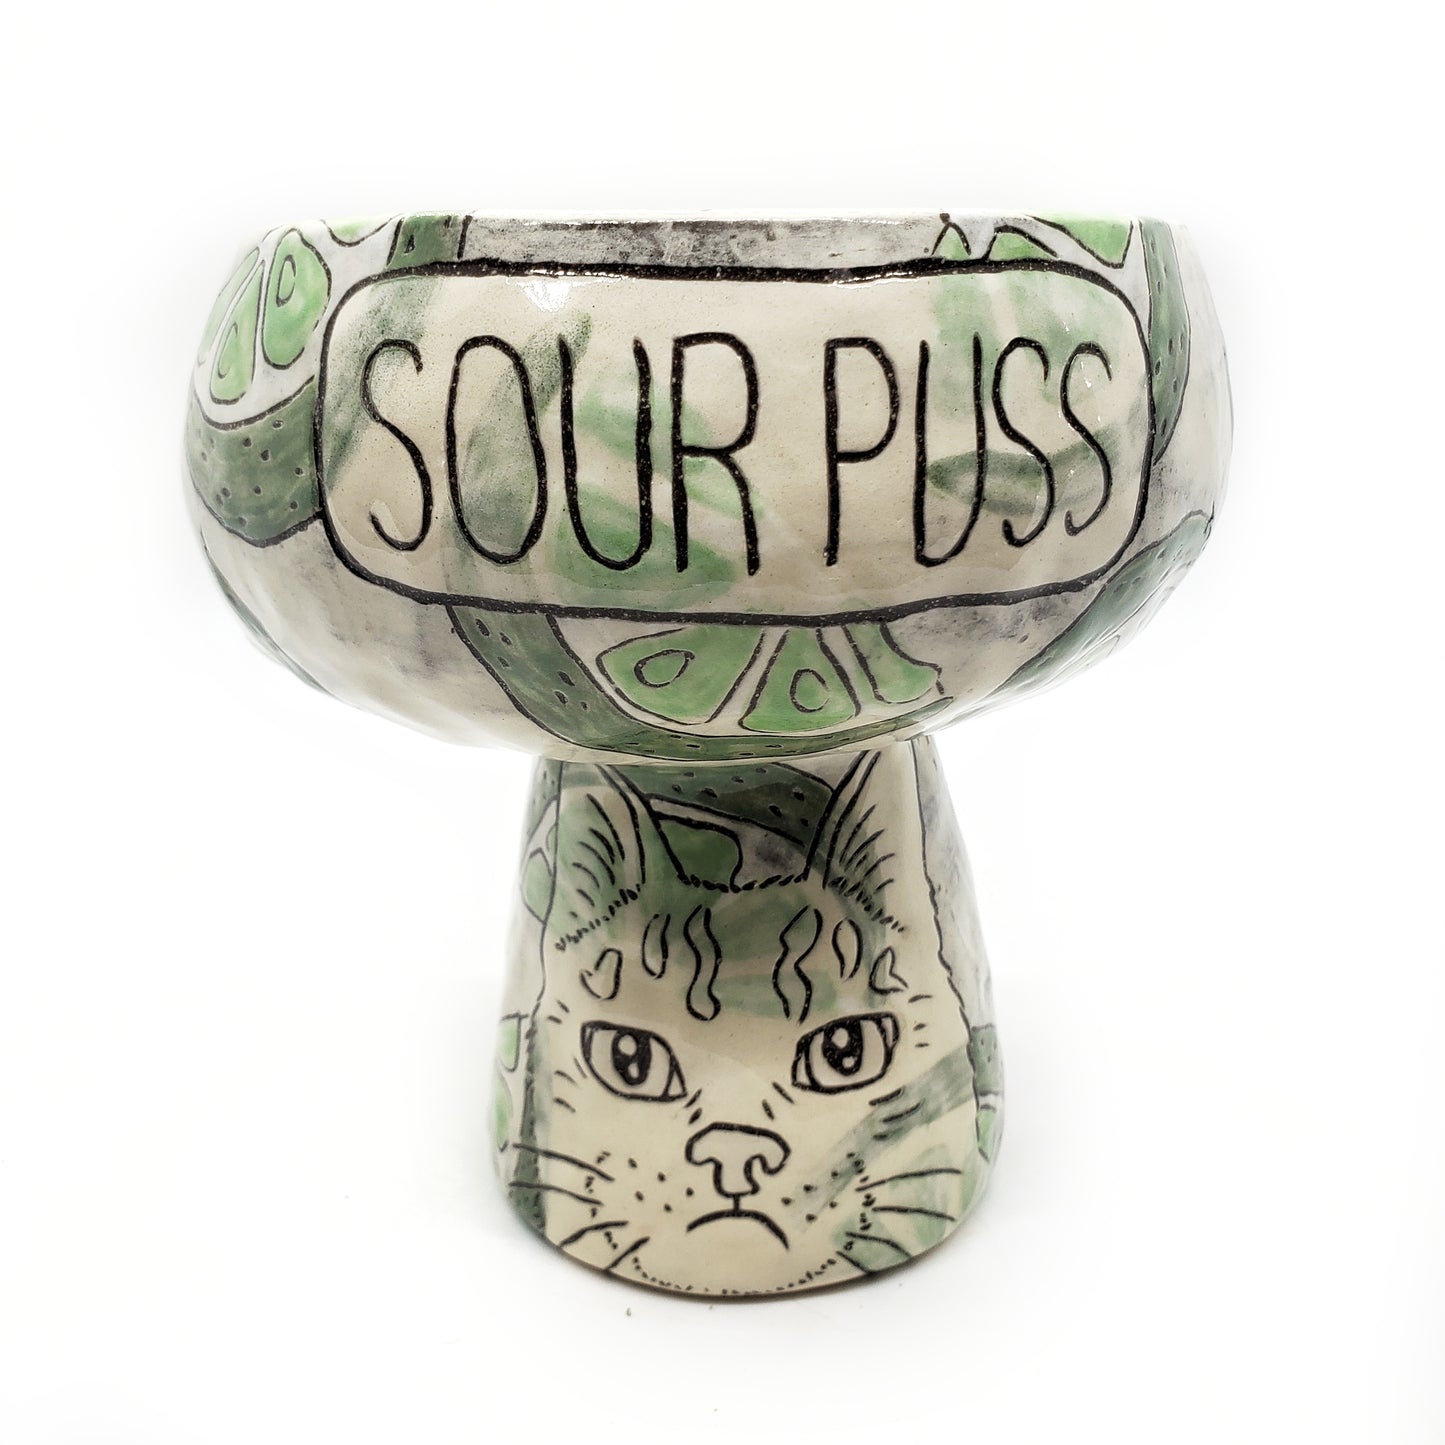 SECOND: Margarita cup, stemless - Sour puss (16 oz)